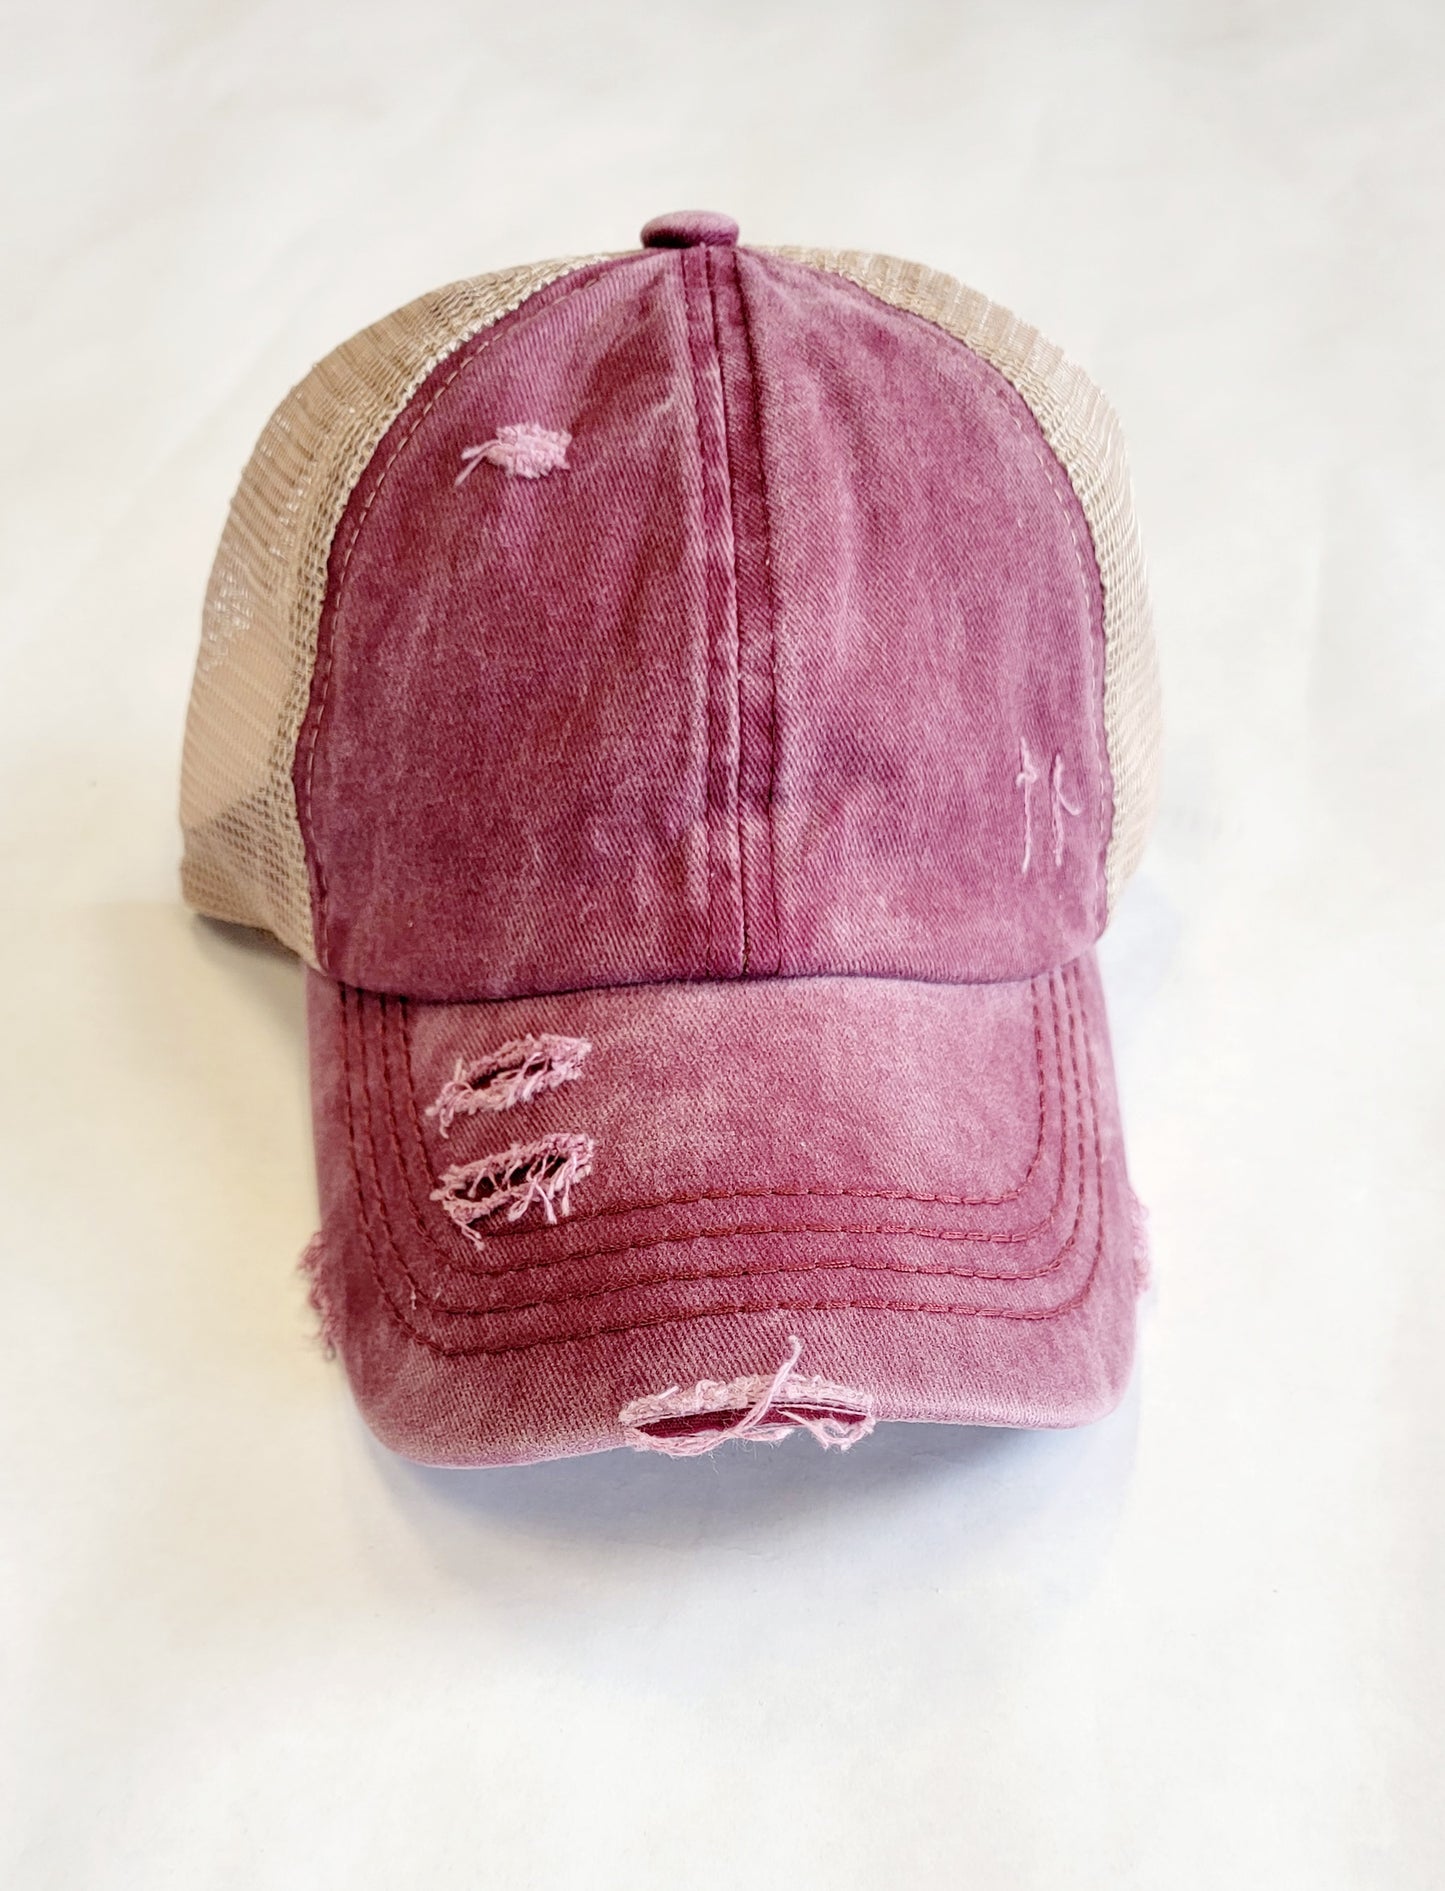 Distressed Criss Cross Ponytail Cap with Mesh Back